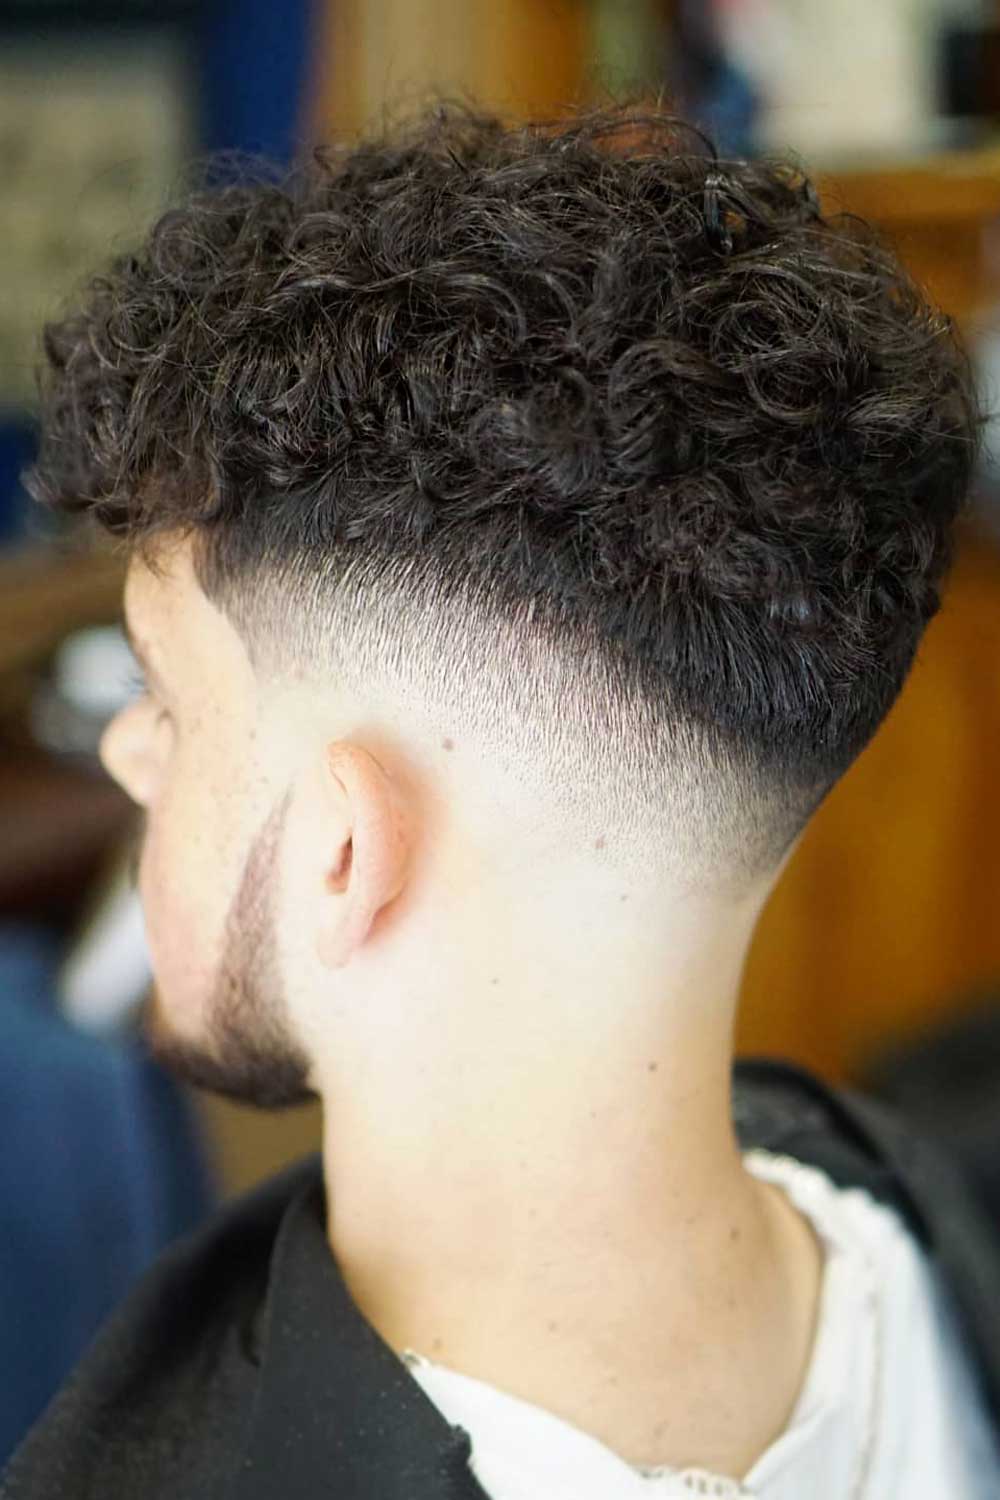 Curly Drop Fade with Shaved Sides Hairstyles #taperfadecurlyhair #taperfade #curlyhair #taper #fade